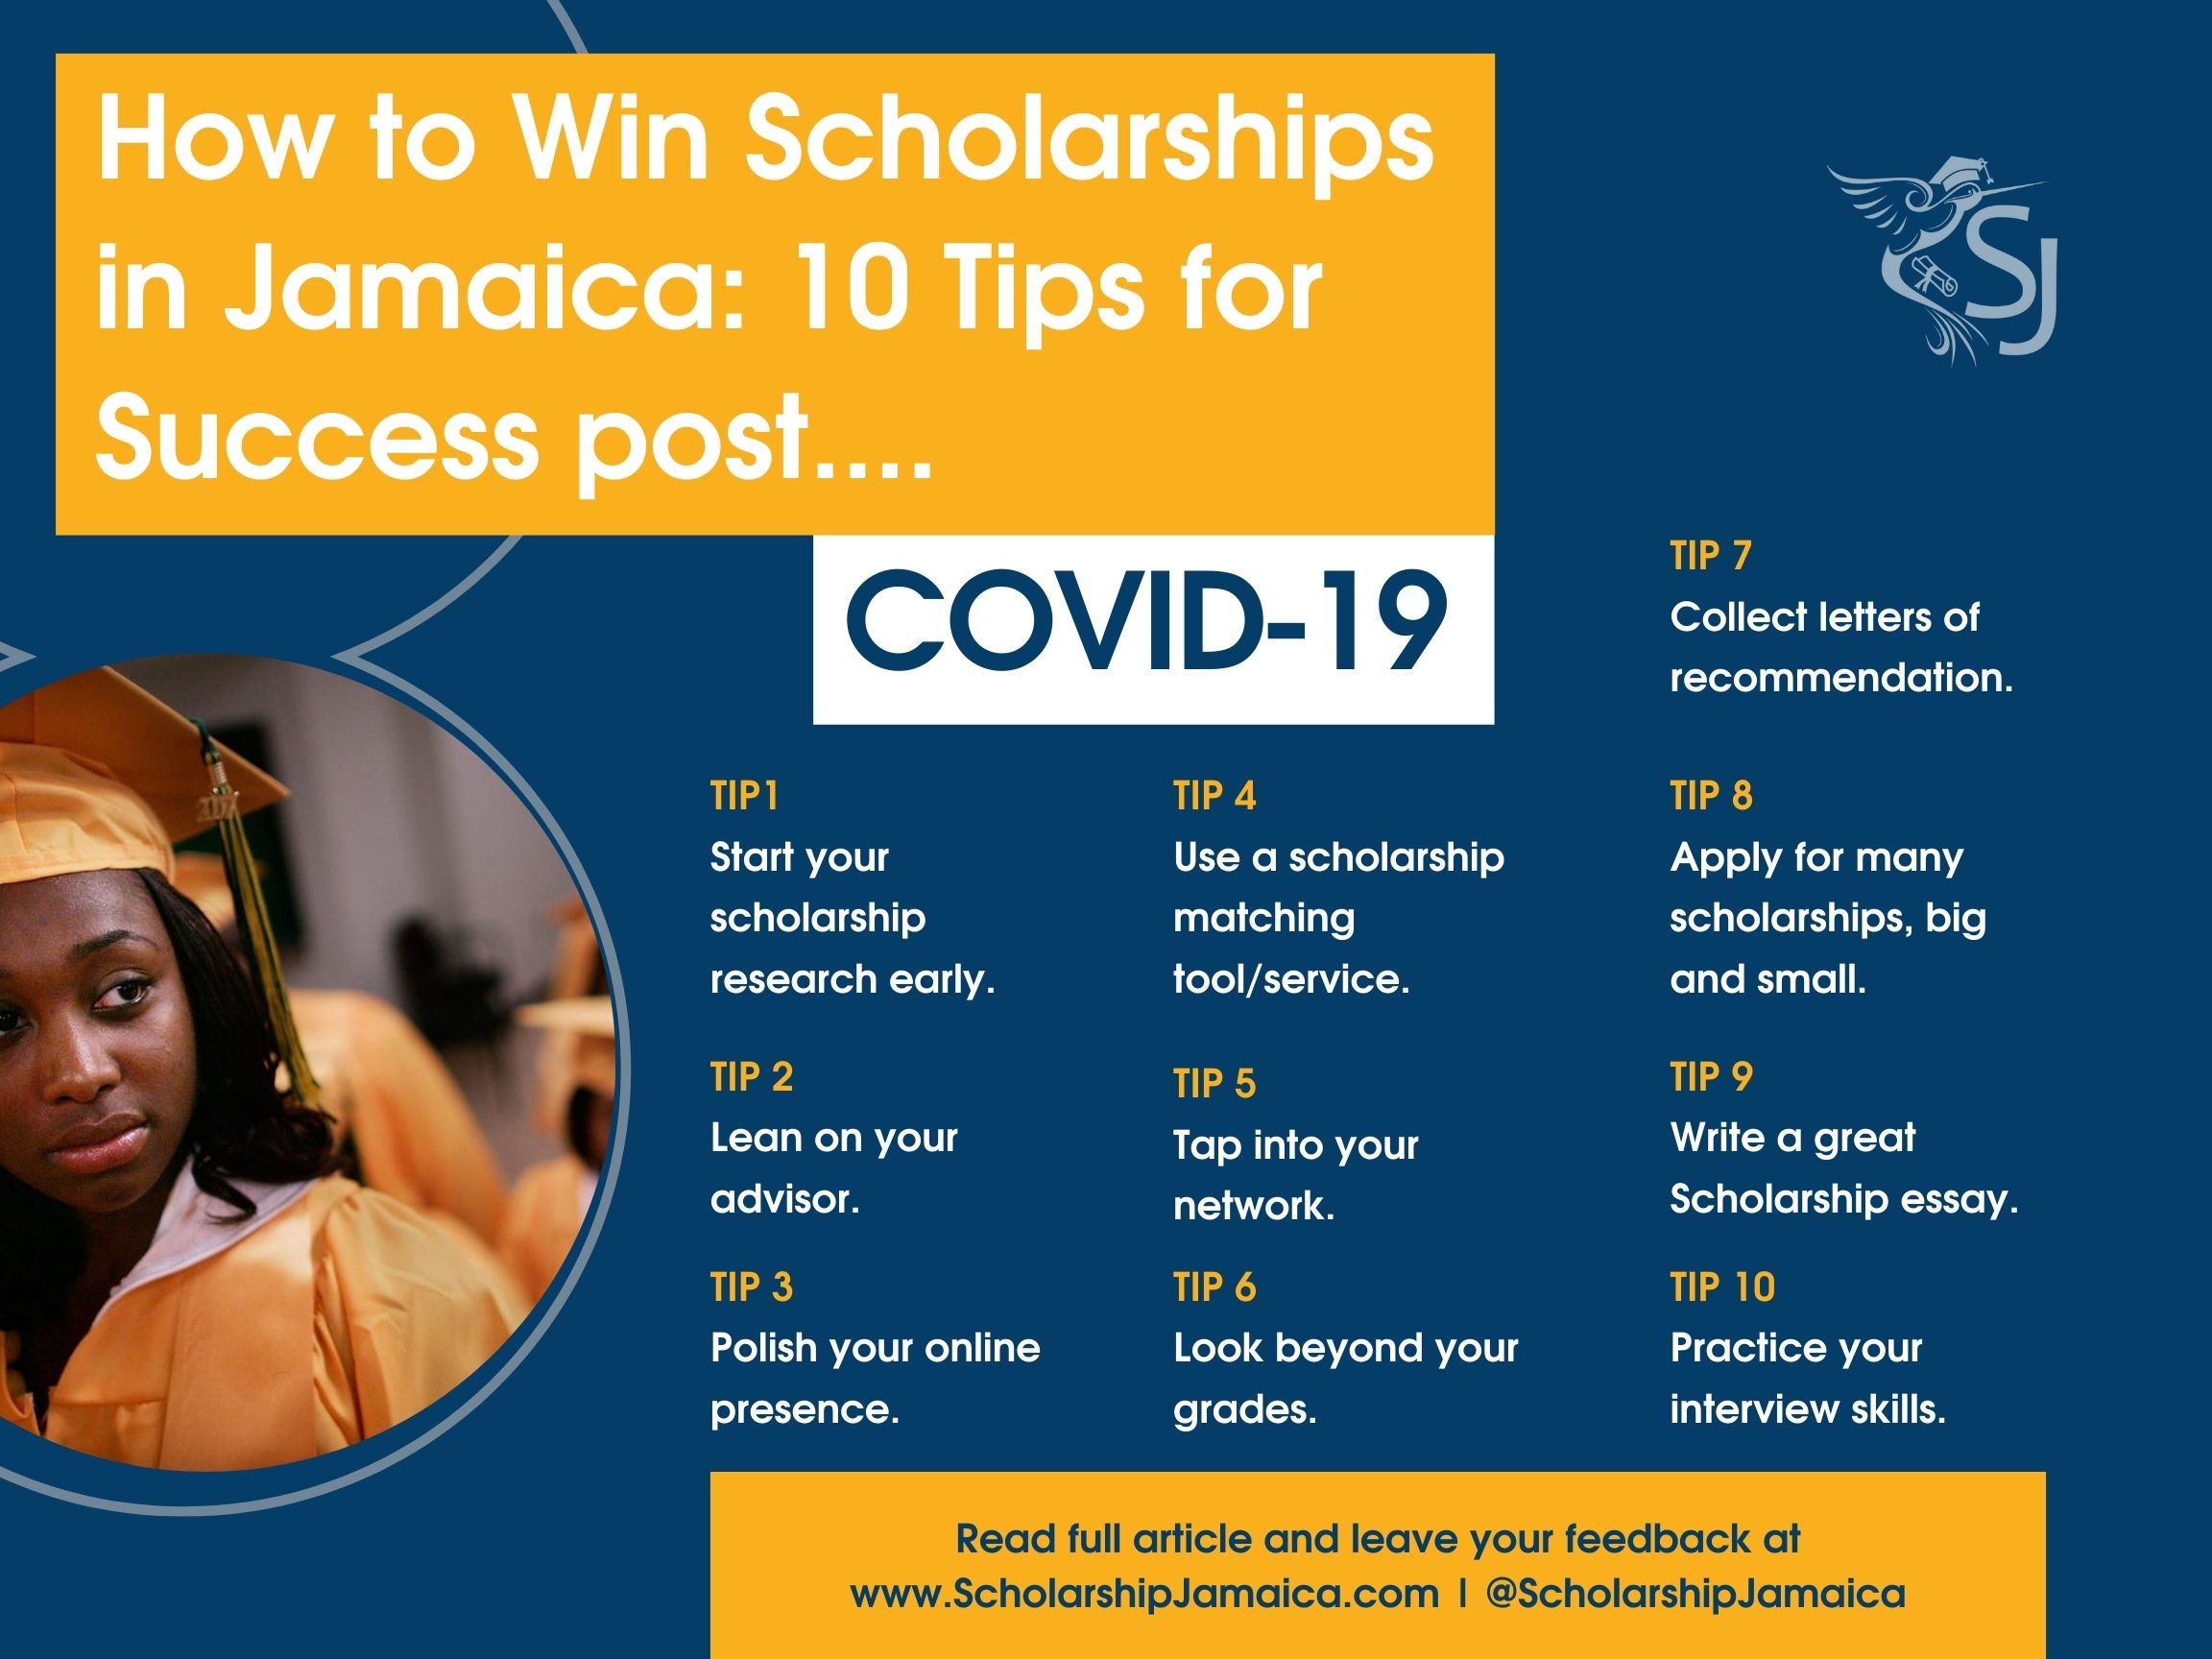 How to Win Scholarships in Jamaica Post COVID-19